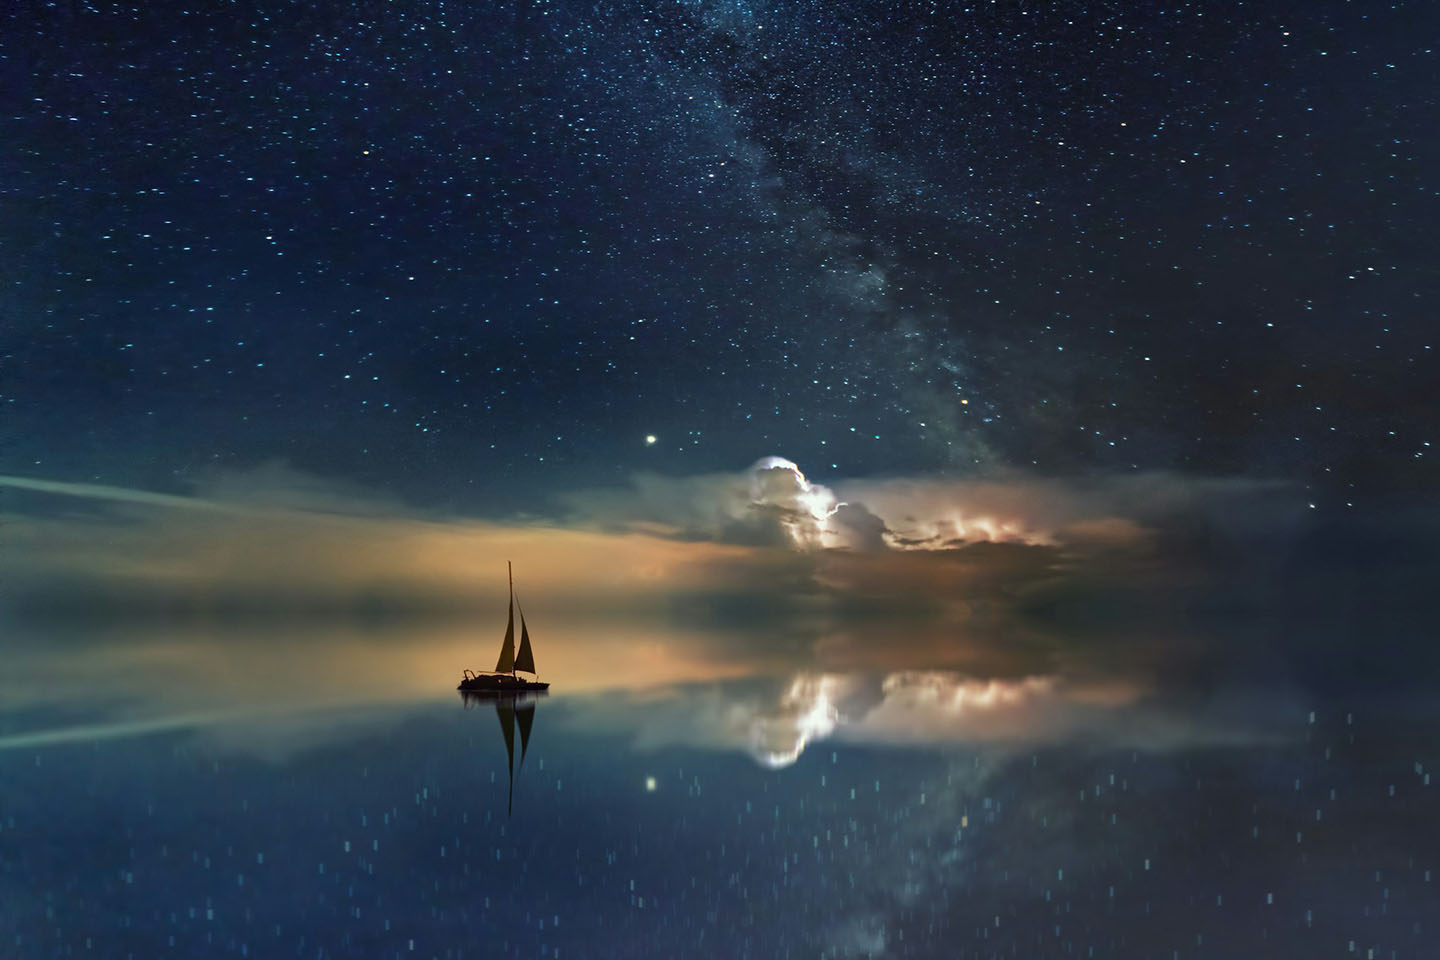 small sail boat under starry night sky, reflecting in the still water